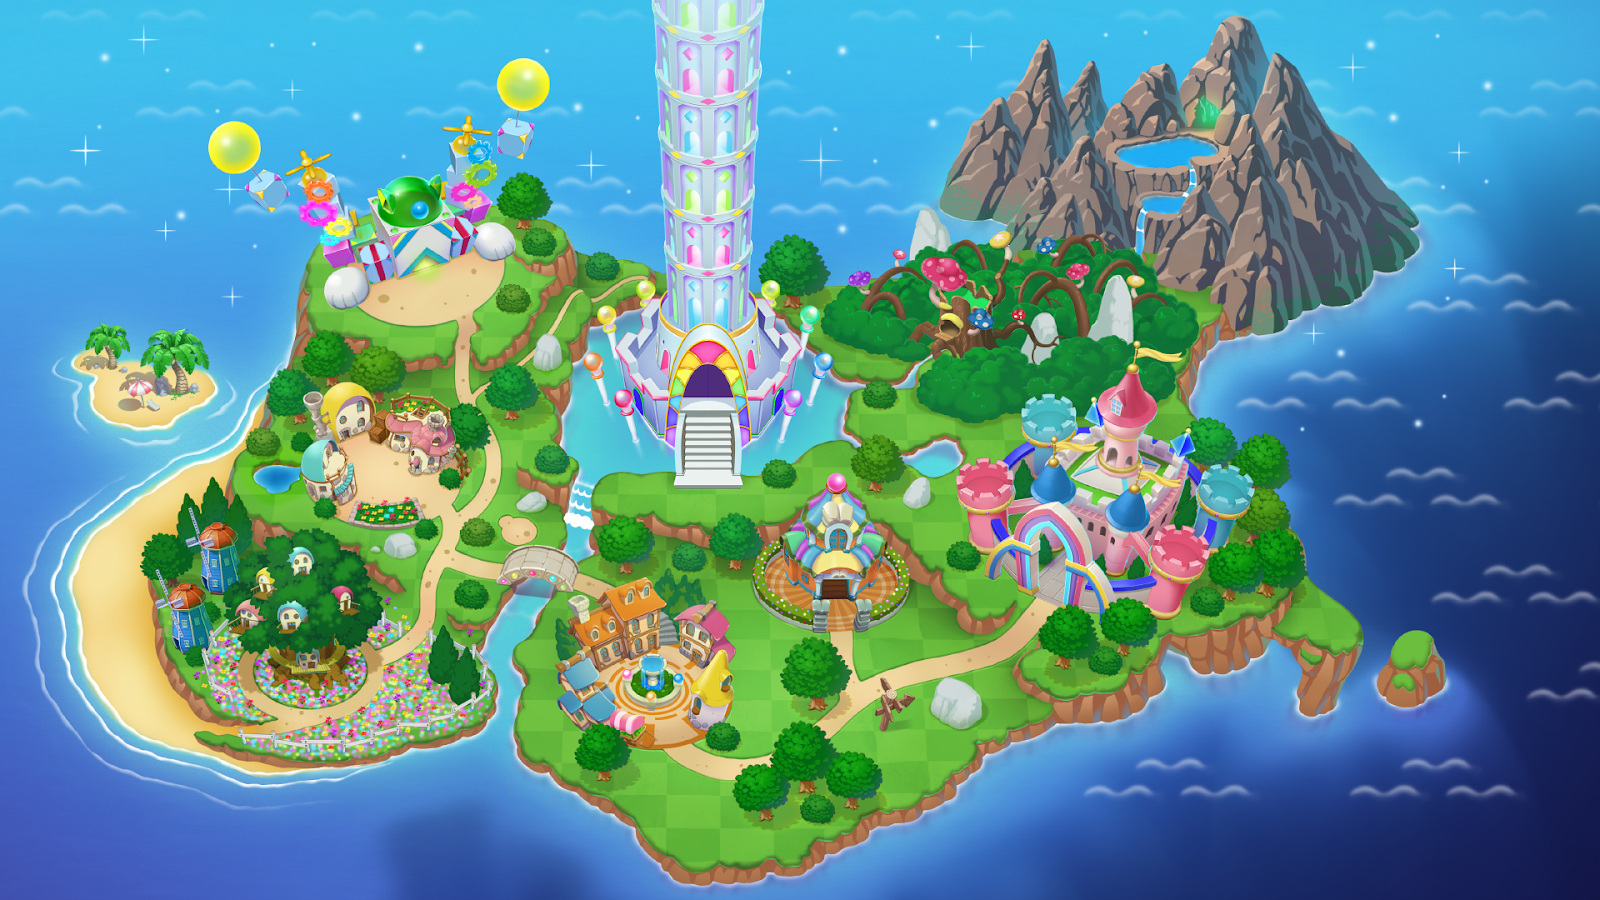 The game's map, which shows that the levels are set across a large island.